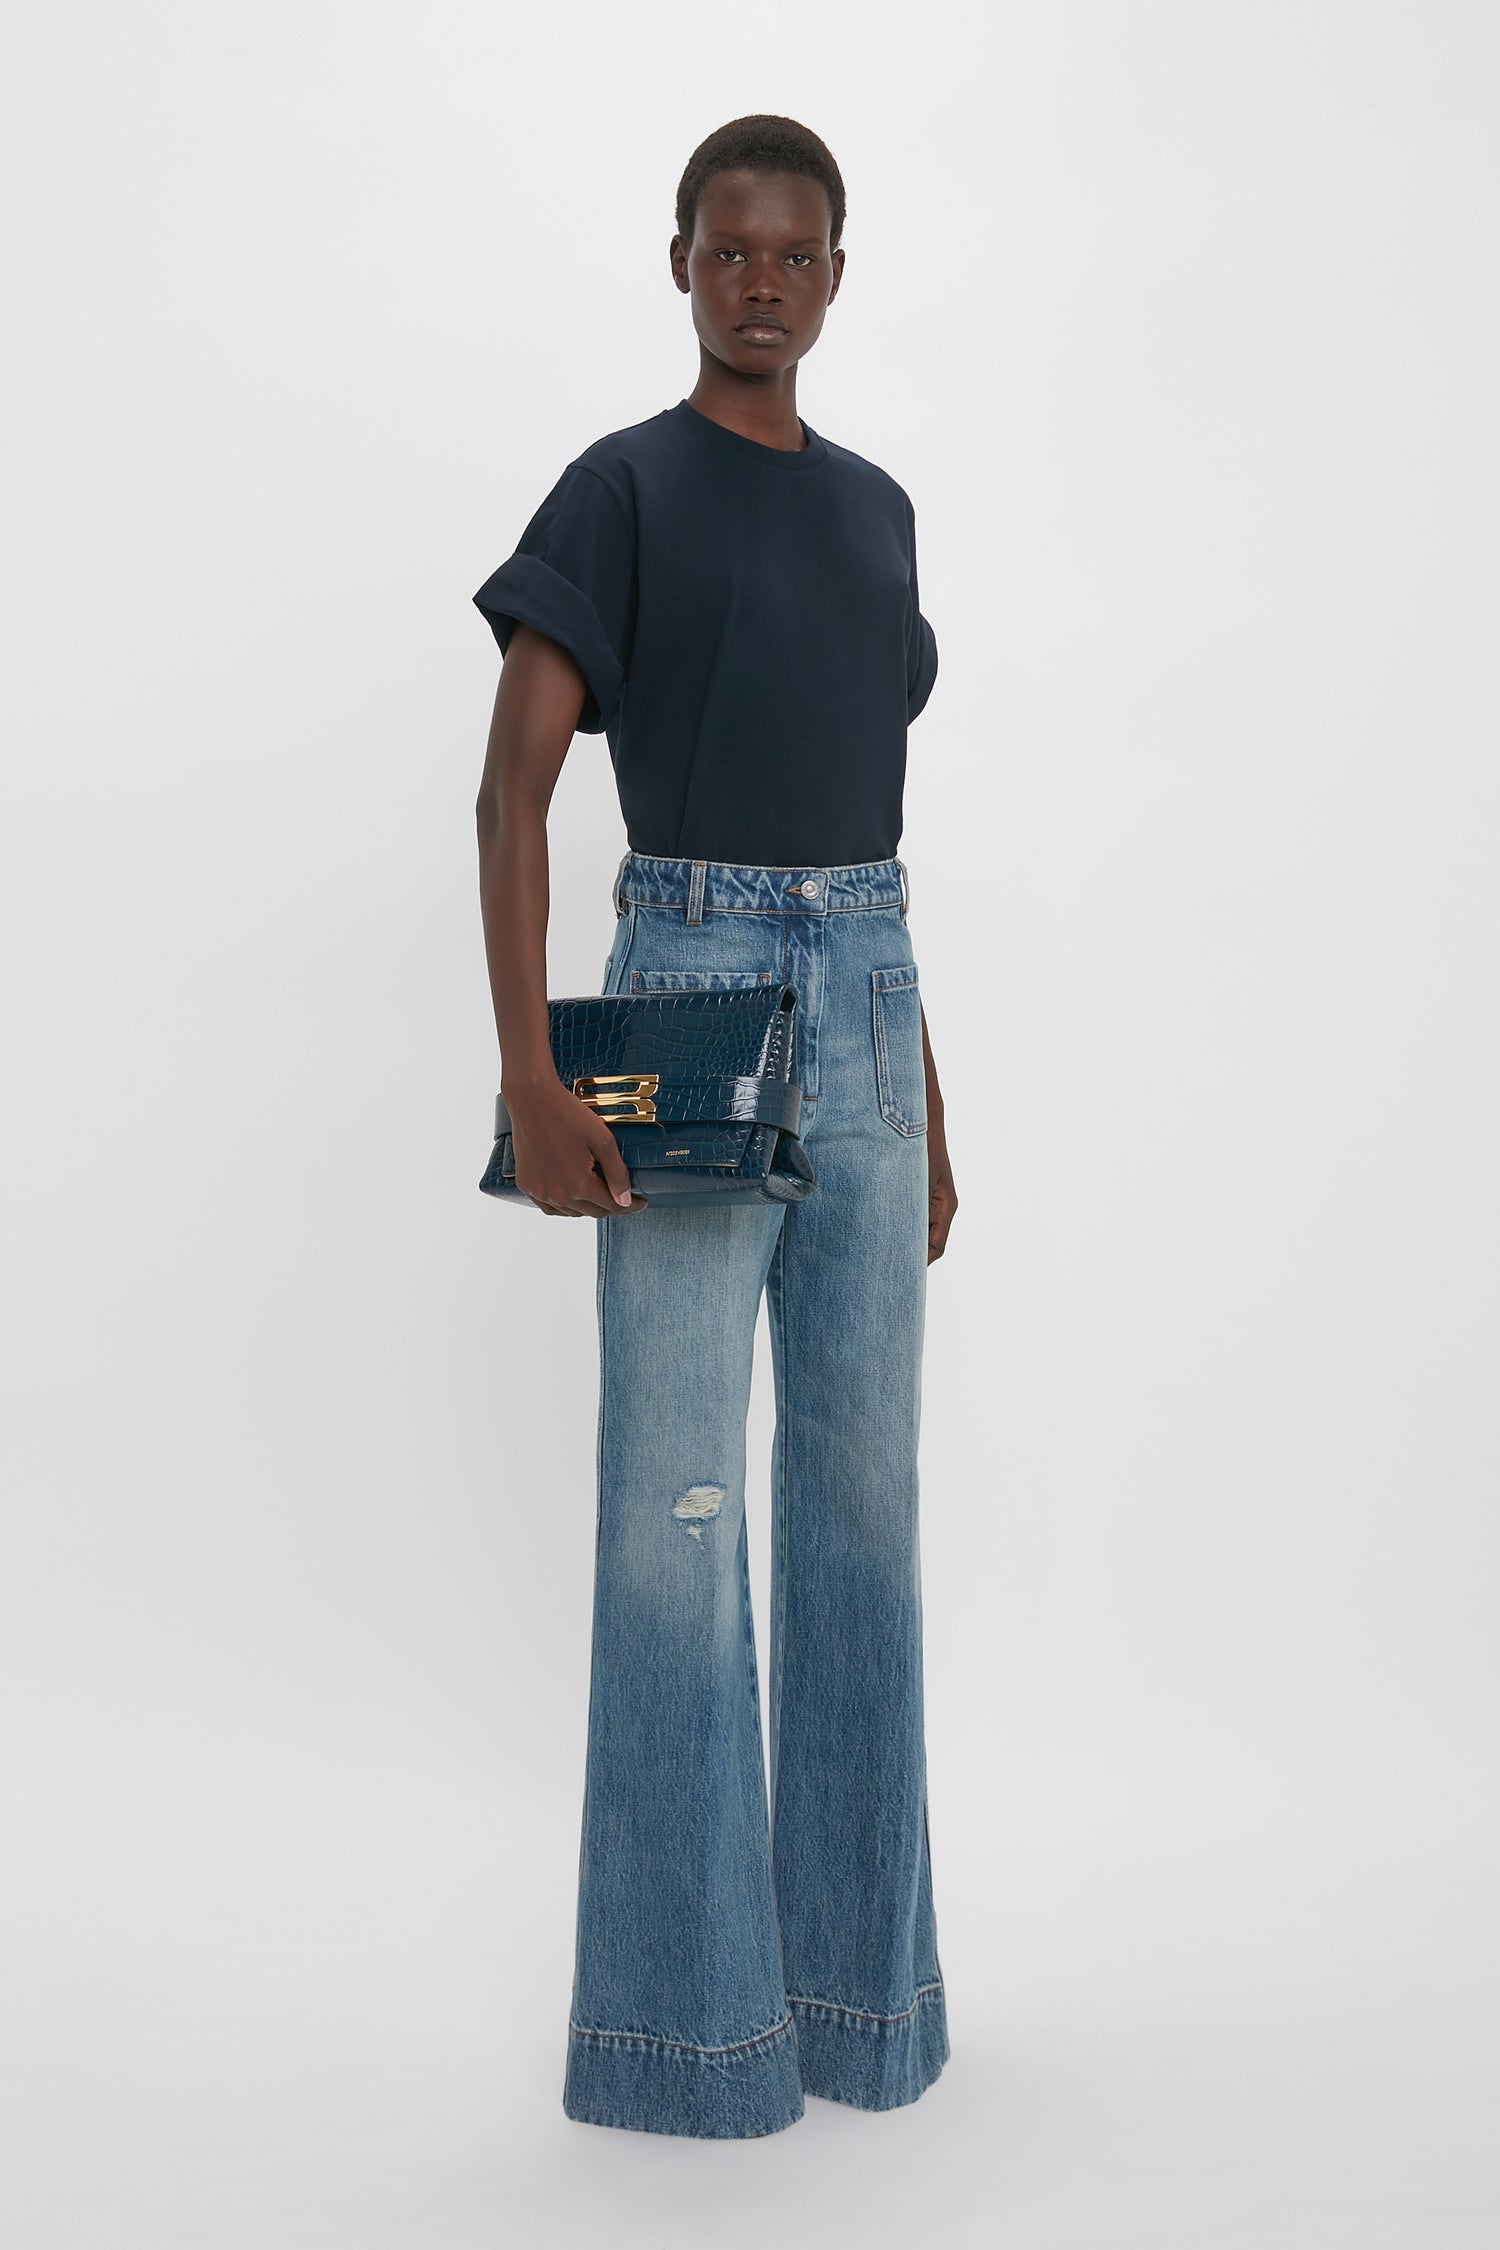 A person stands against a plain background, wearing an oversized navy "Asymmetric Relaxed Fit T-Shirt In Navy" by Victoria Beckham, light blue high-waisted denim pants, and holding a dark blue handbag.